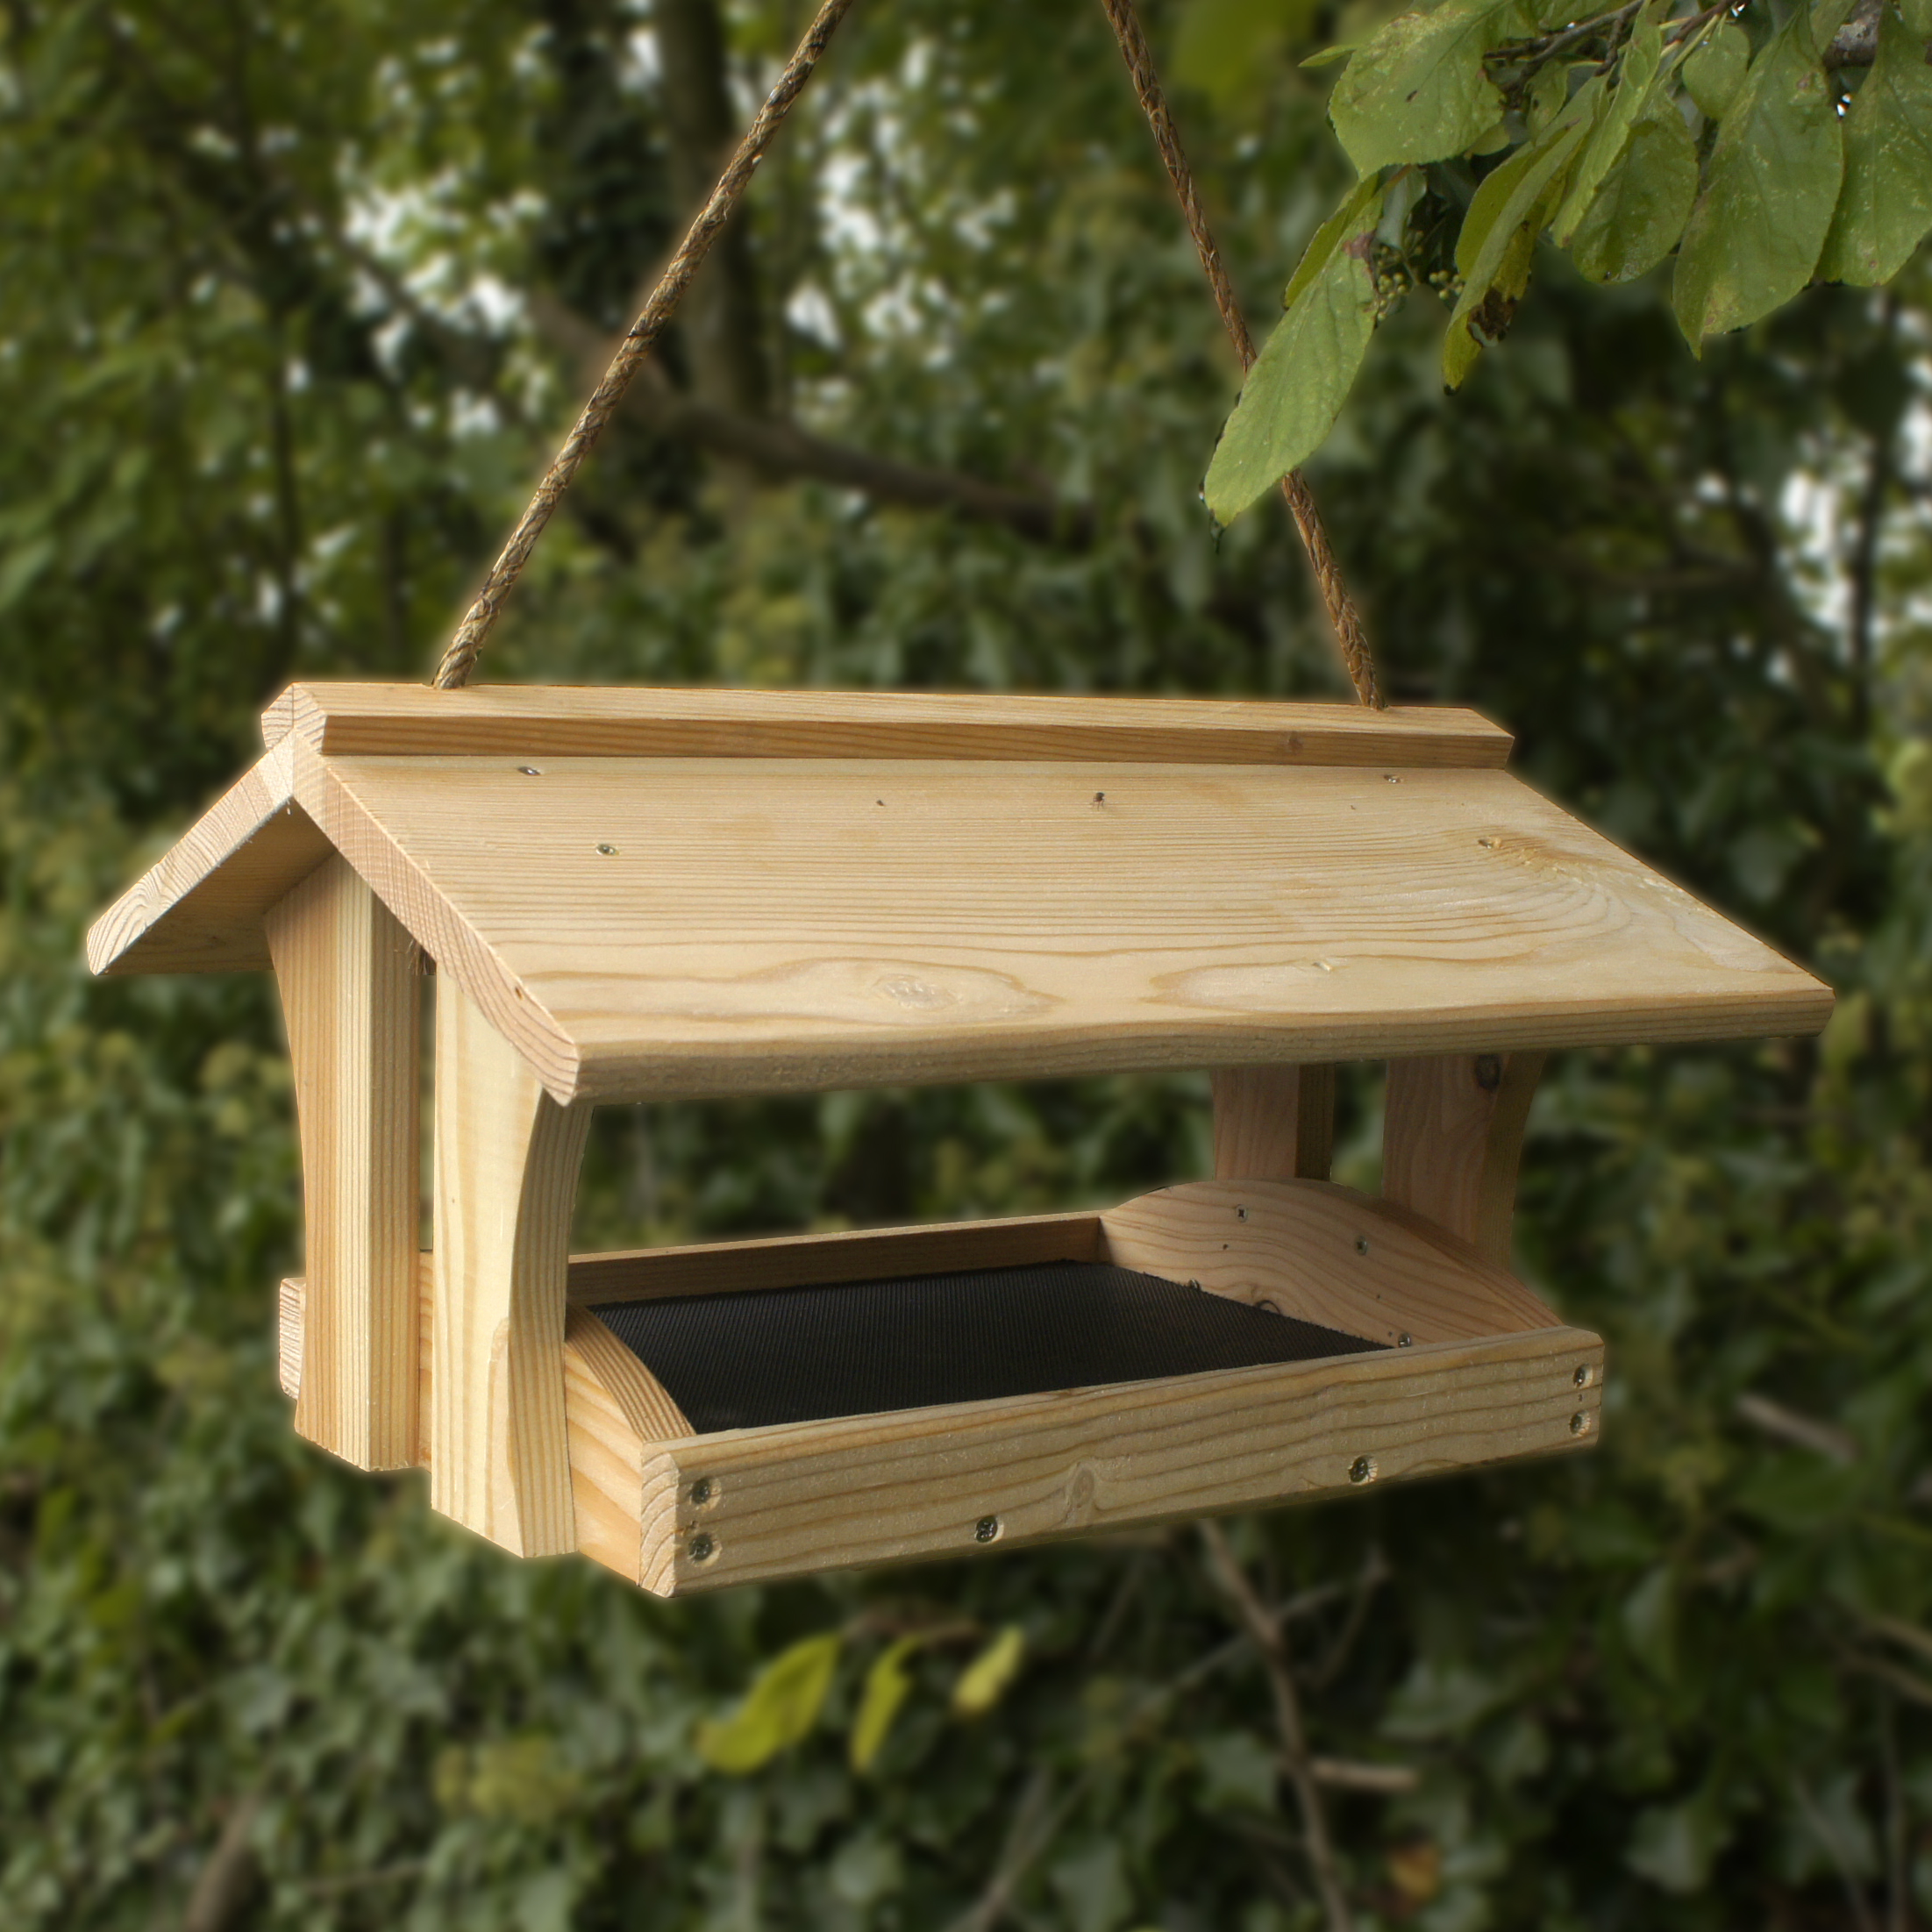  project for a lot of backyard birders would be to make a easy wooden